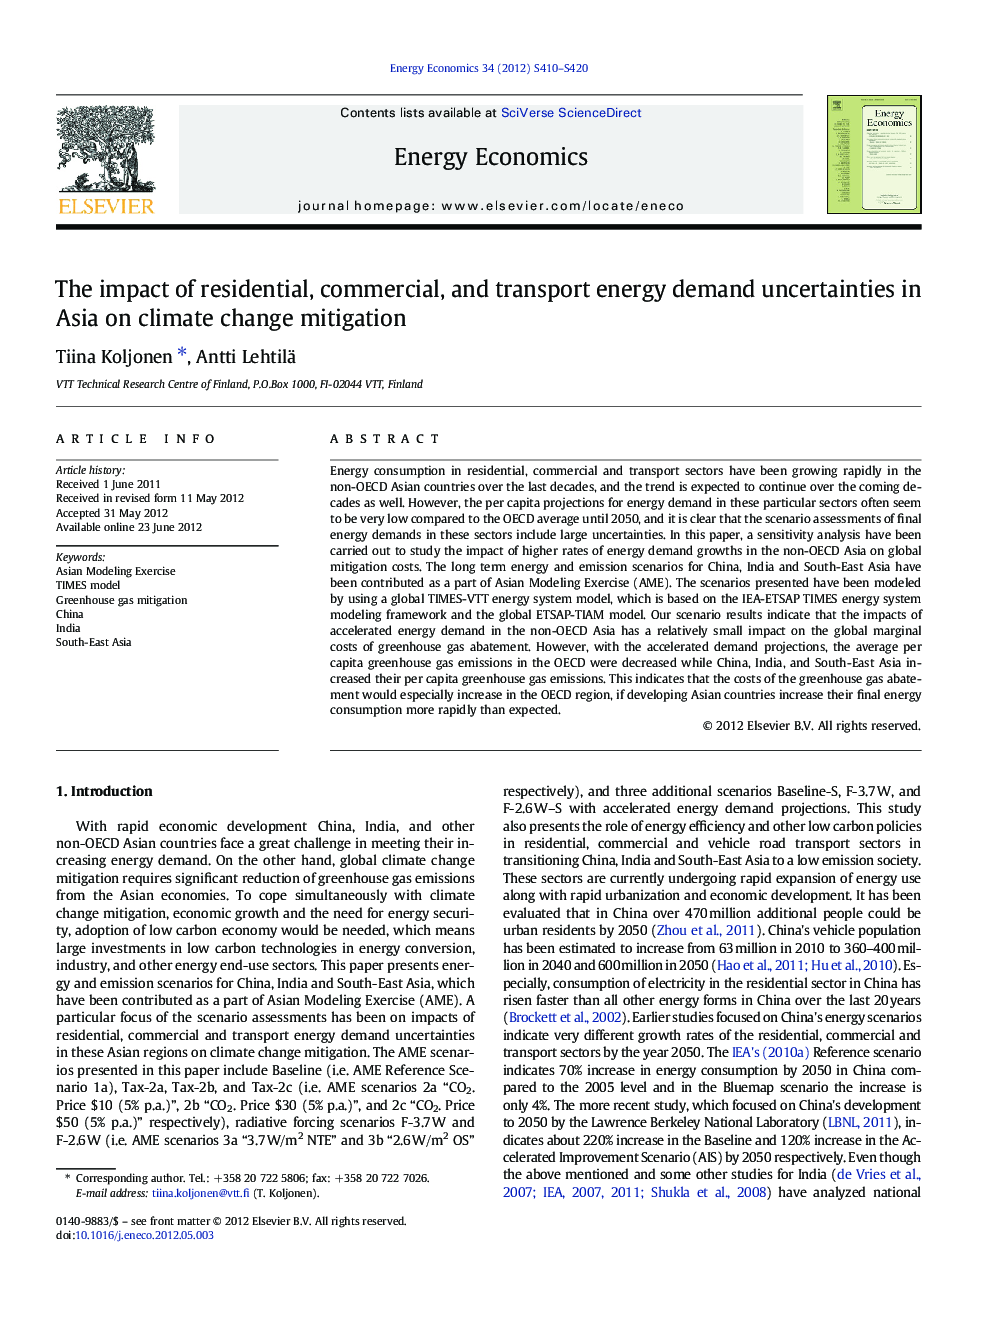 The impact of residential, commercial, and transport energy demand uncertainties in Asia on climate change mitigation